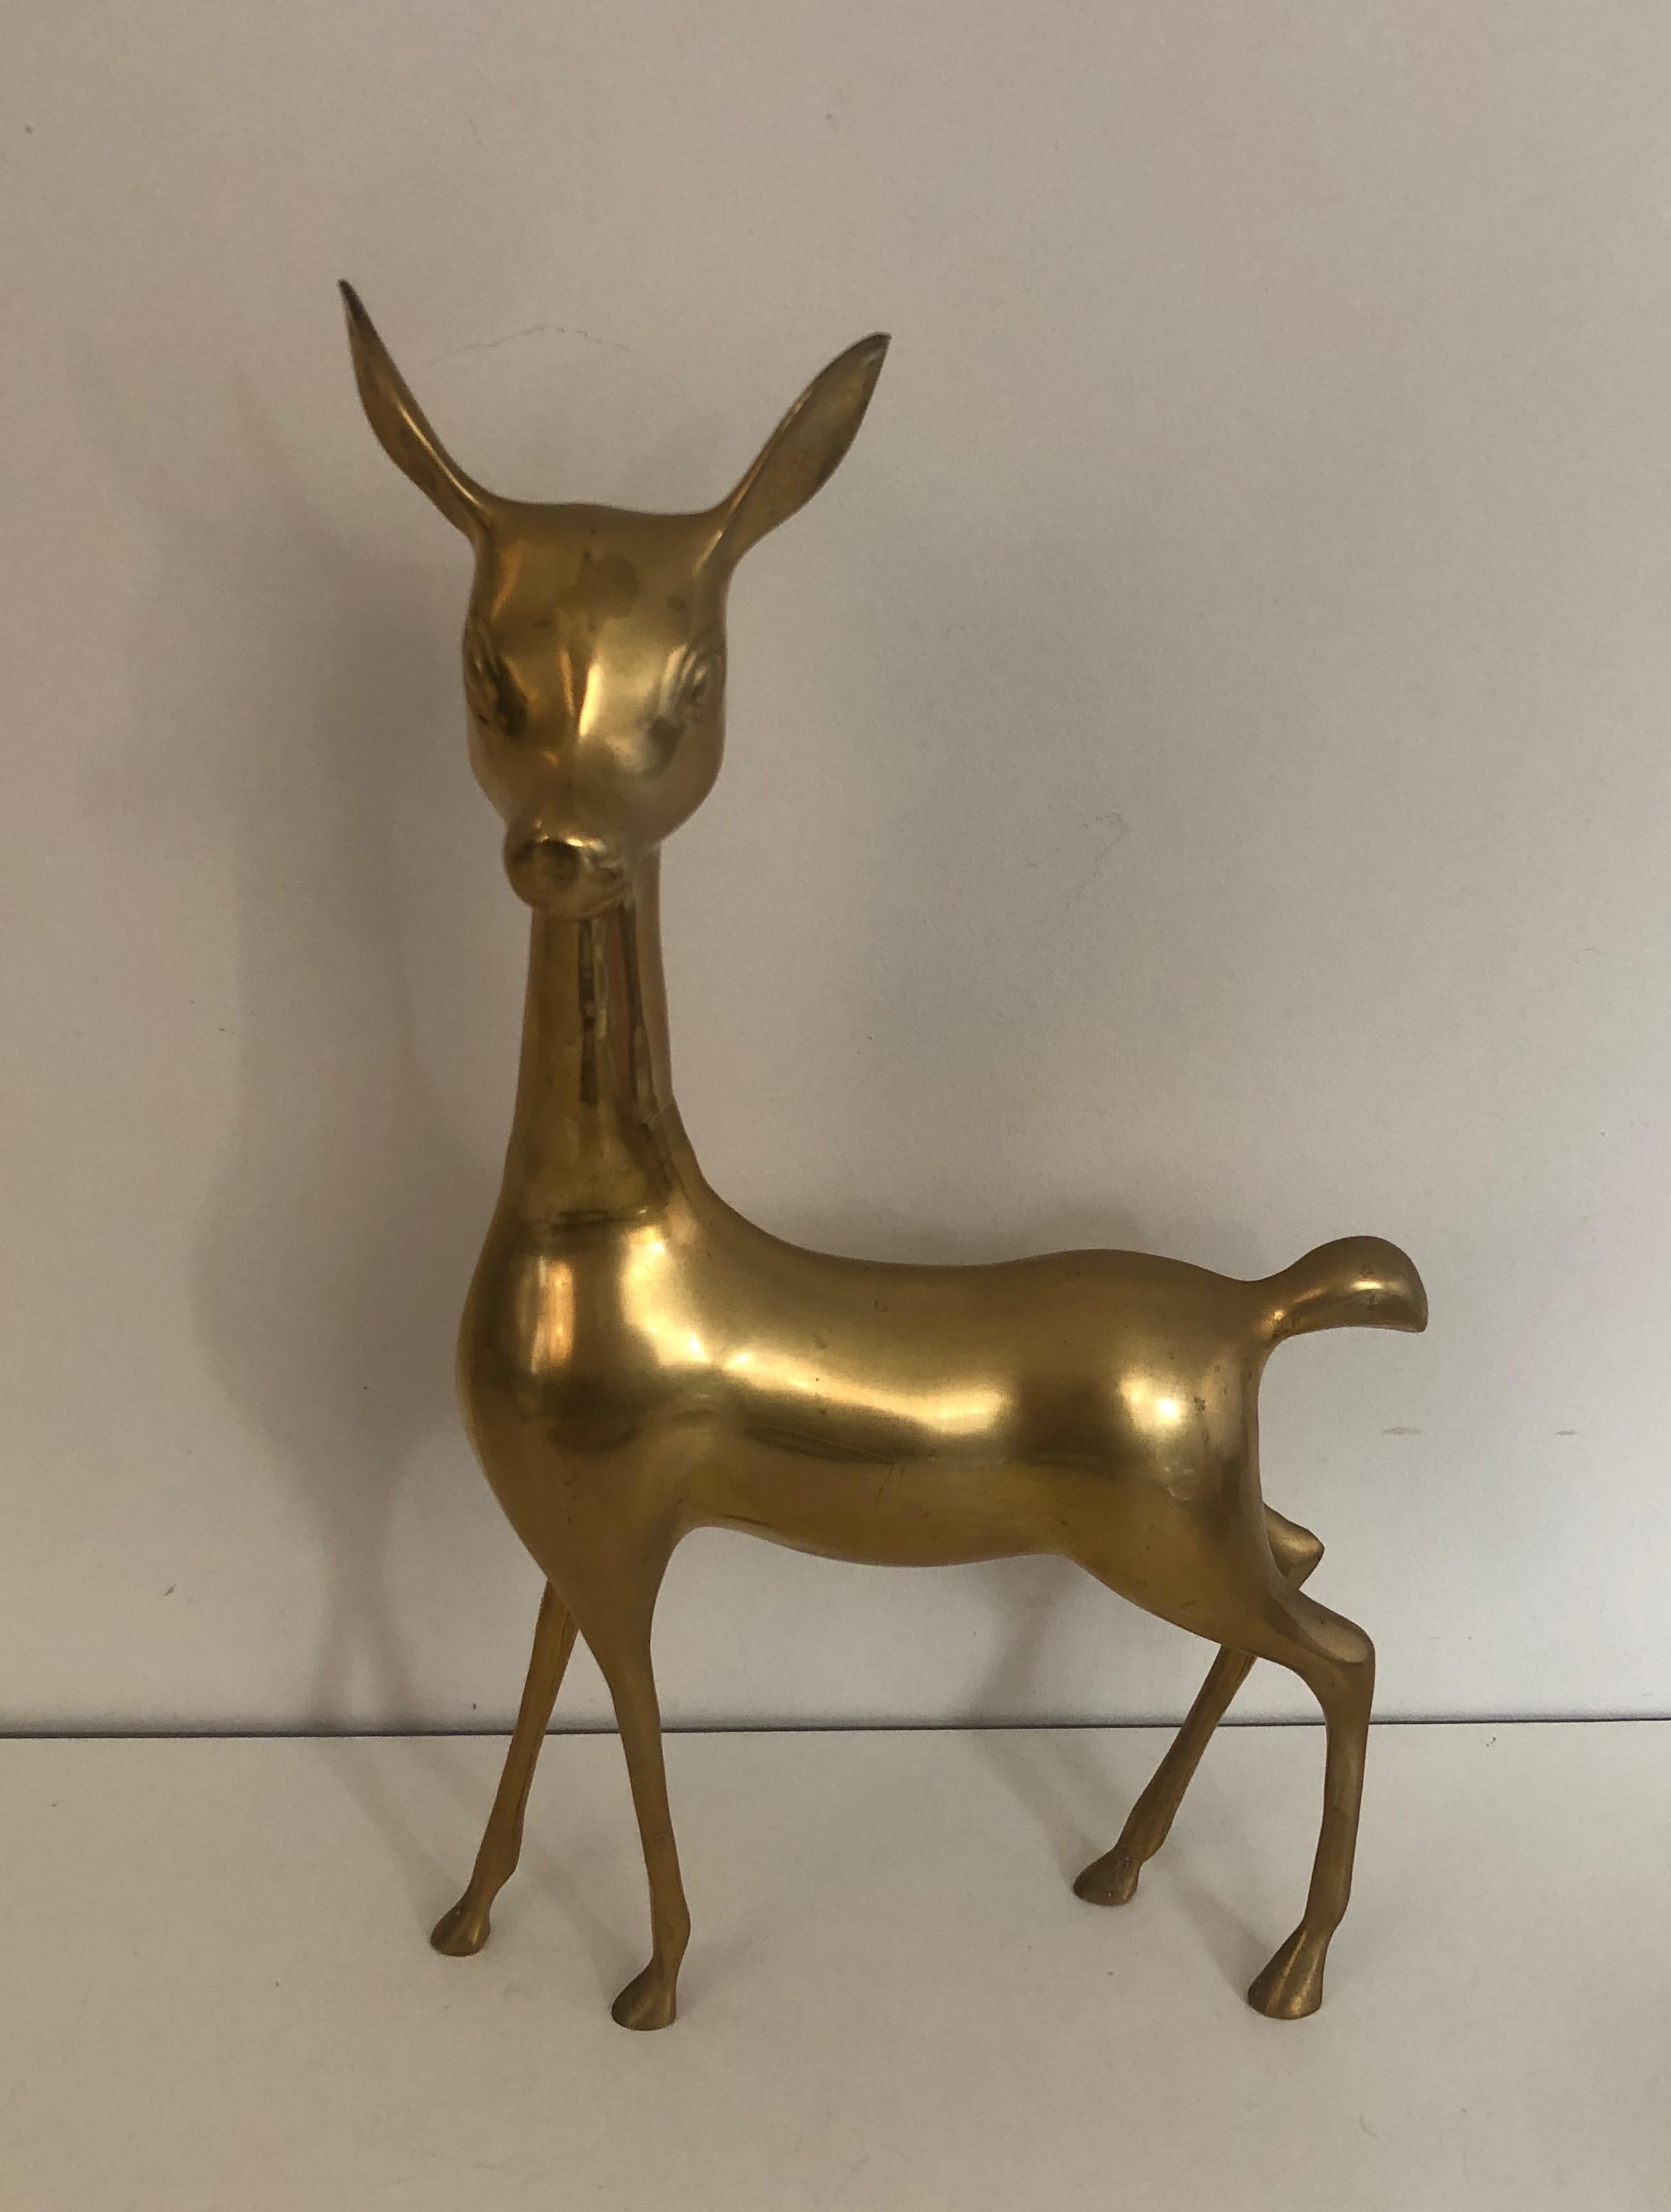 This elegant Doe sculpture is made of brass. This is a French work, circa 1970.